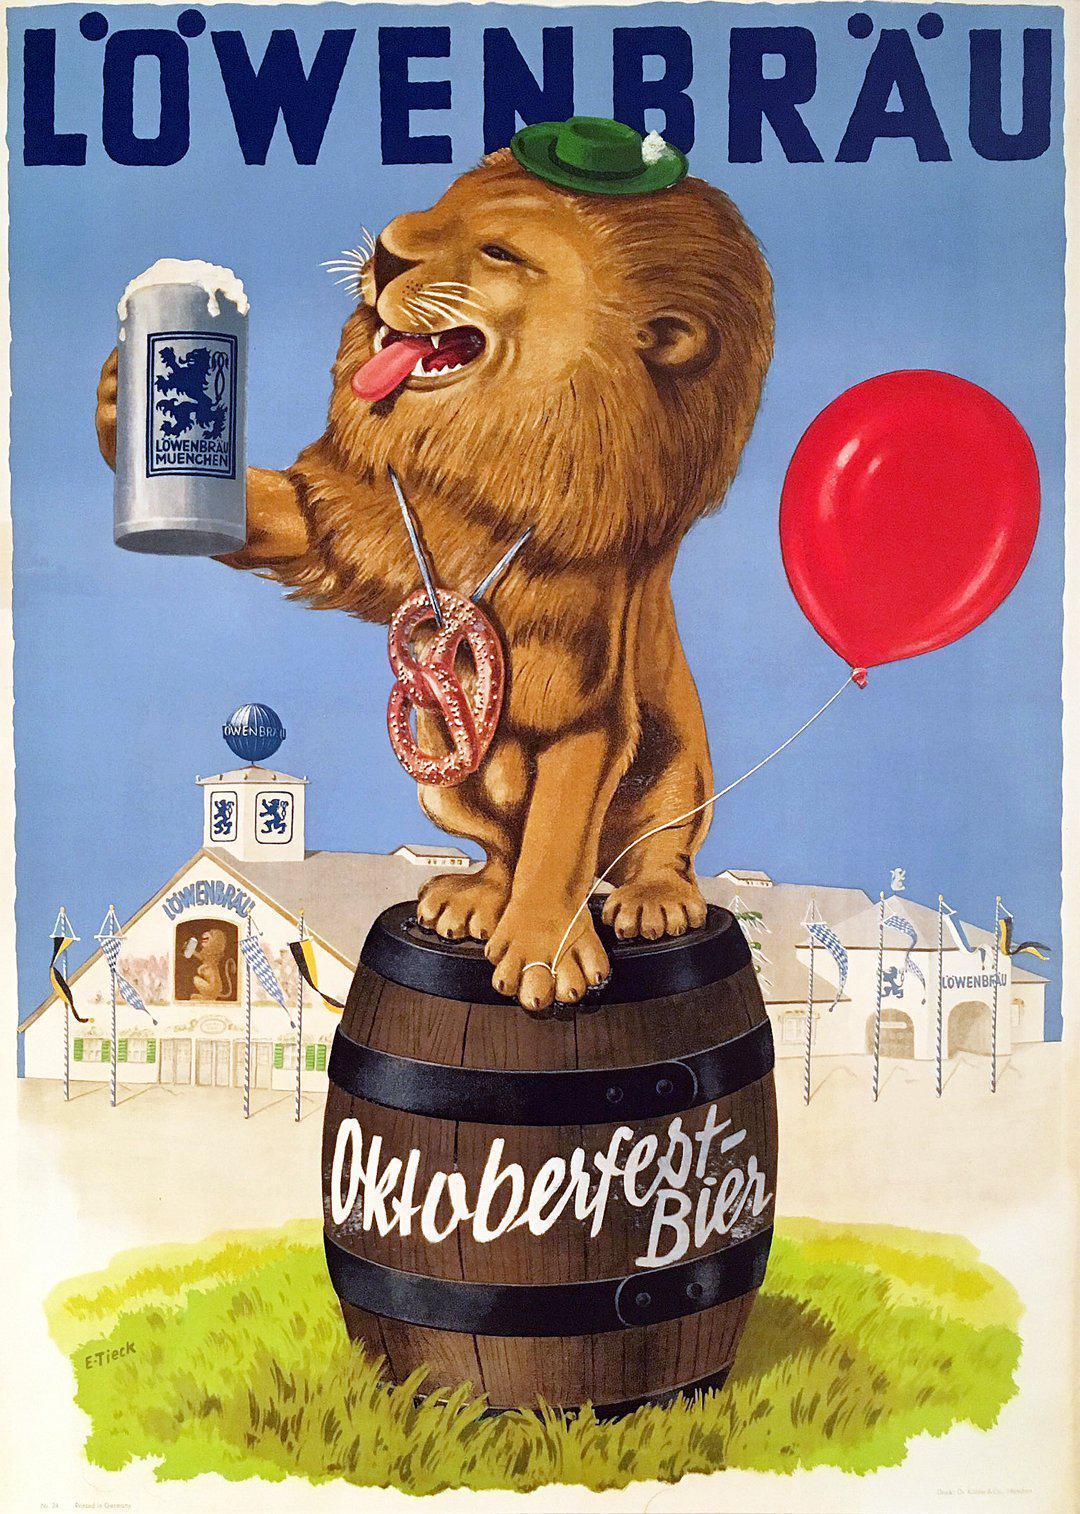 Lowenbrau Beer Poster for Oktoberfest c1955 by E. Tieck